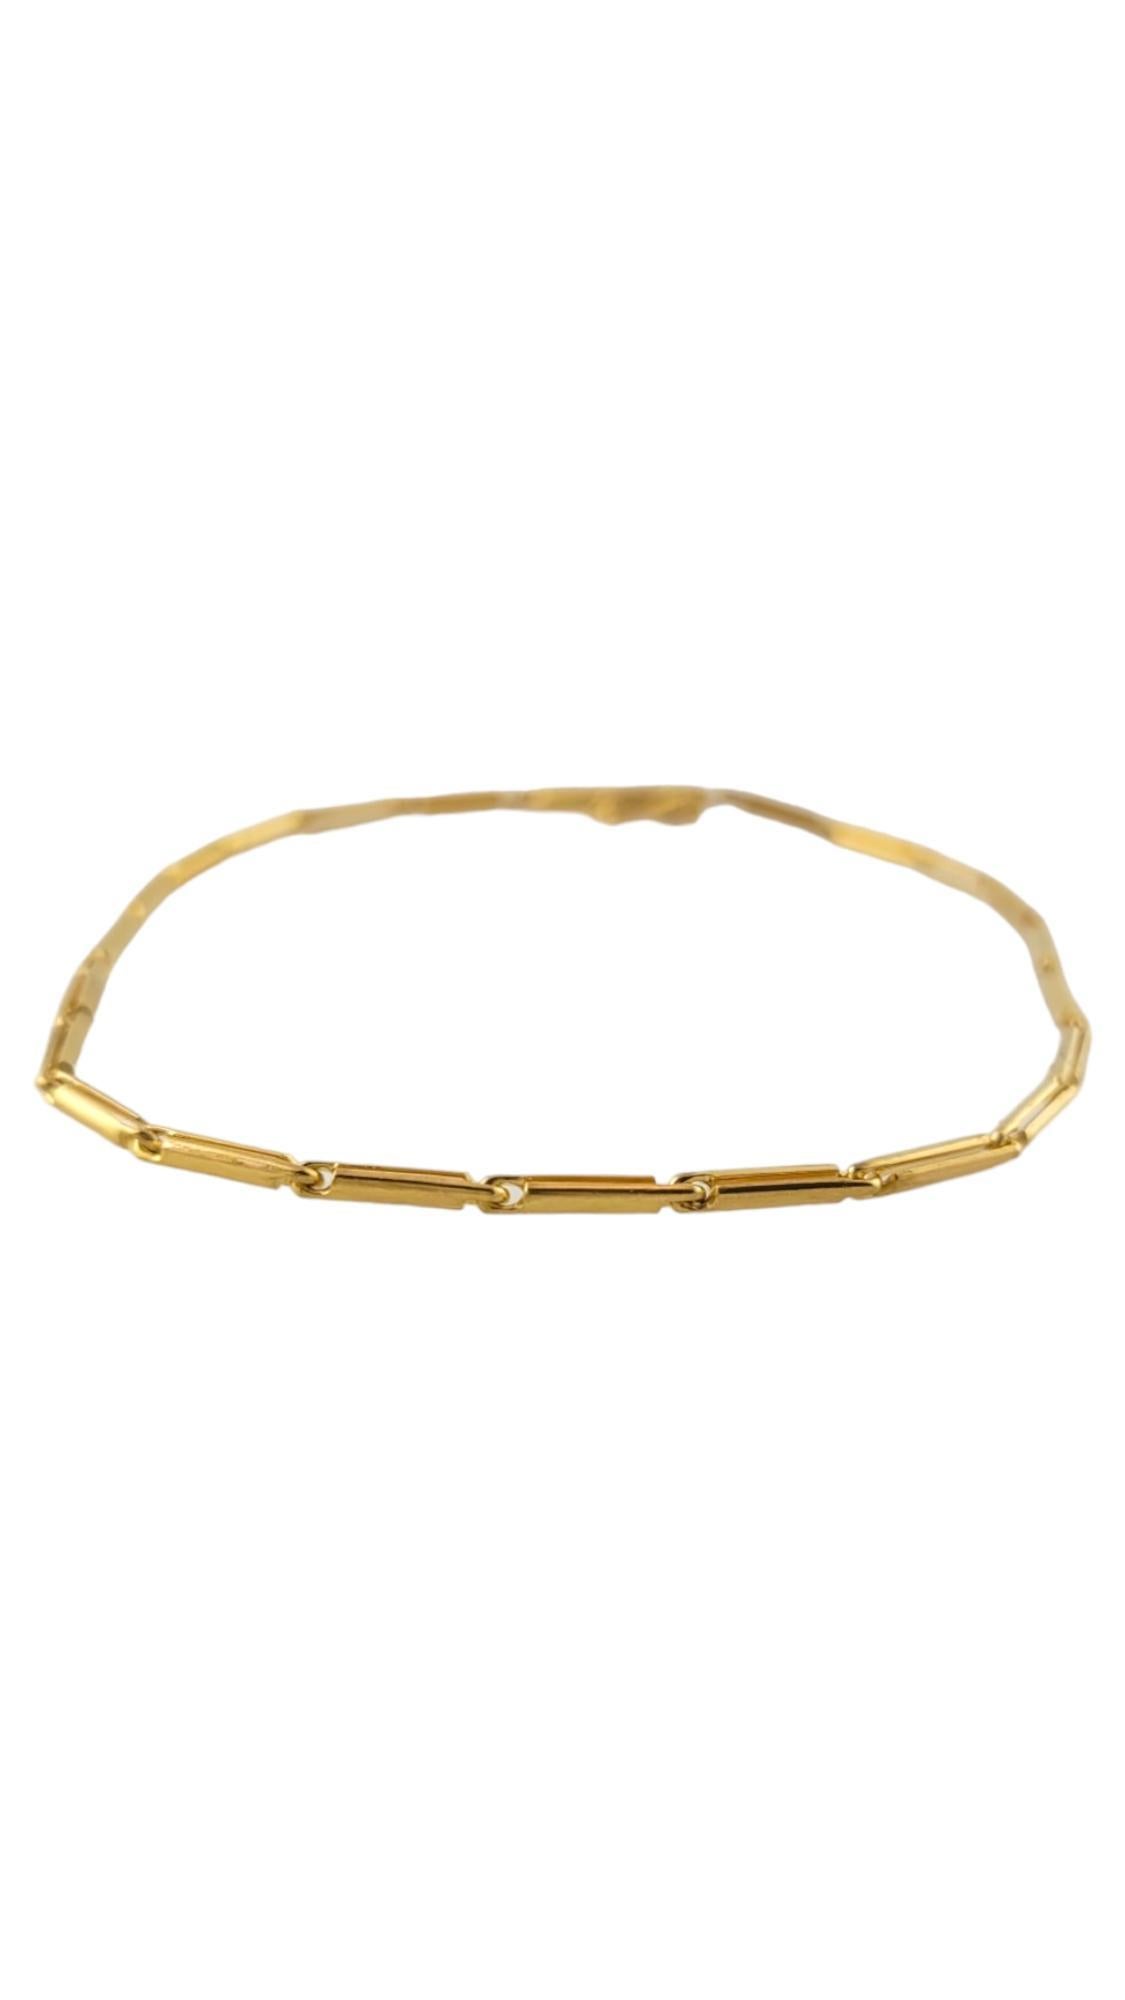 14K Yellow Gold Bar Link Bracelet

This beautiful link bracelet is crafted from 14K yellow gold!

Size: up to 7